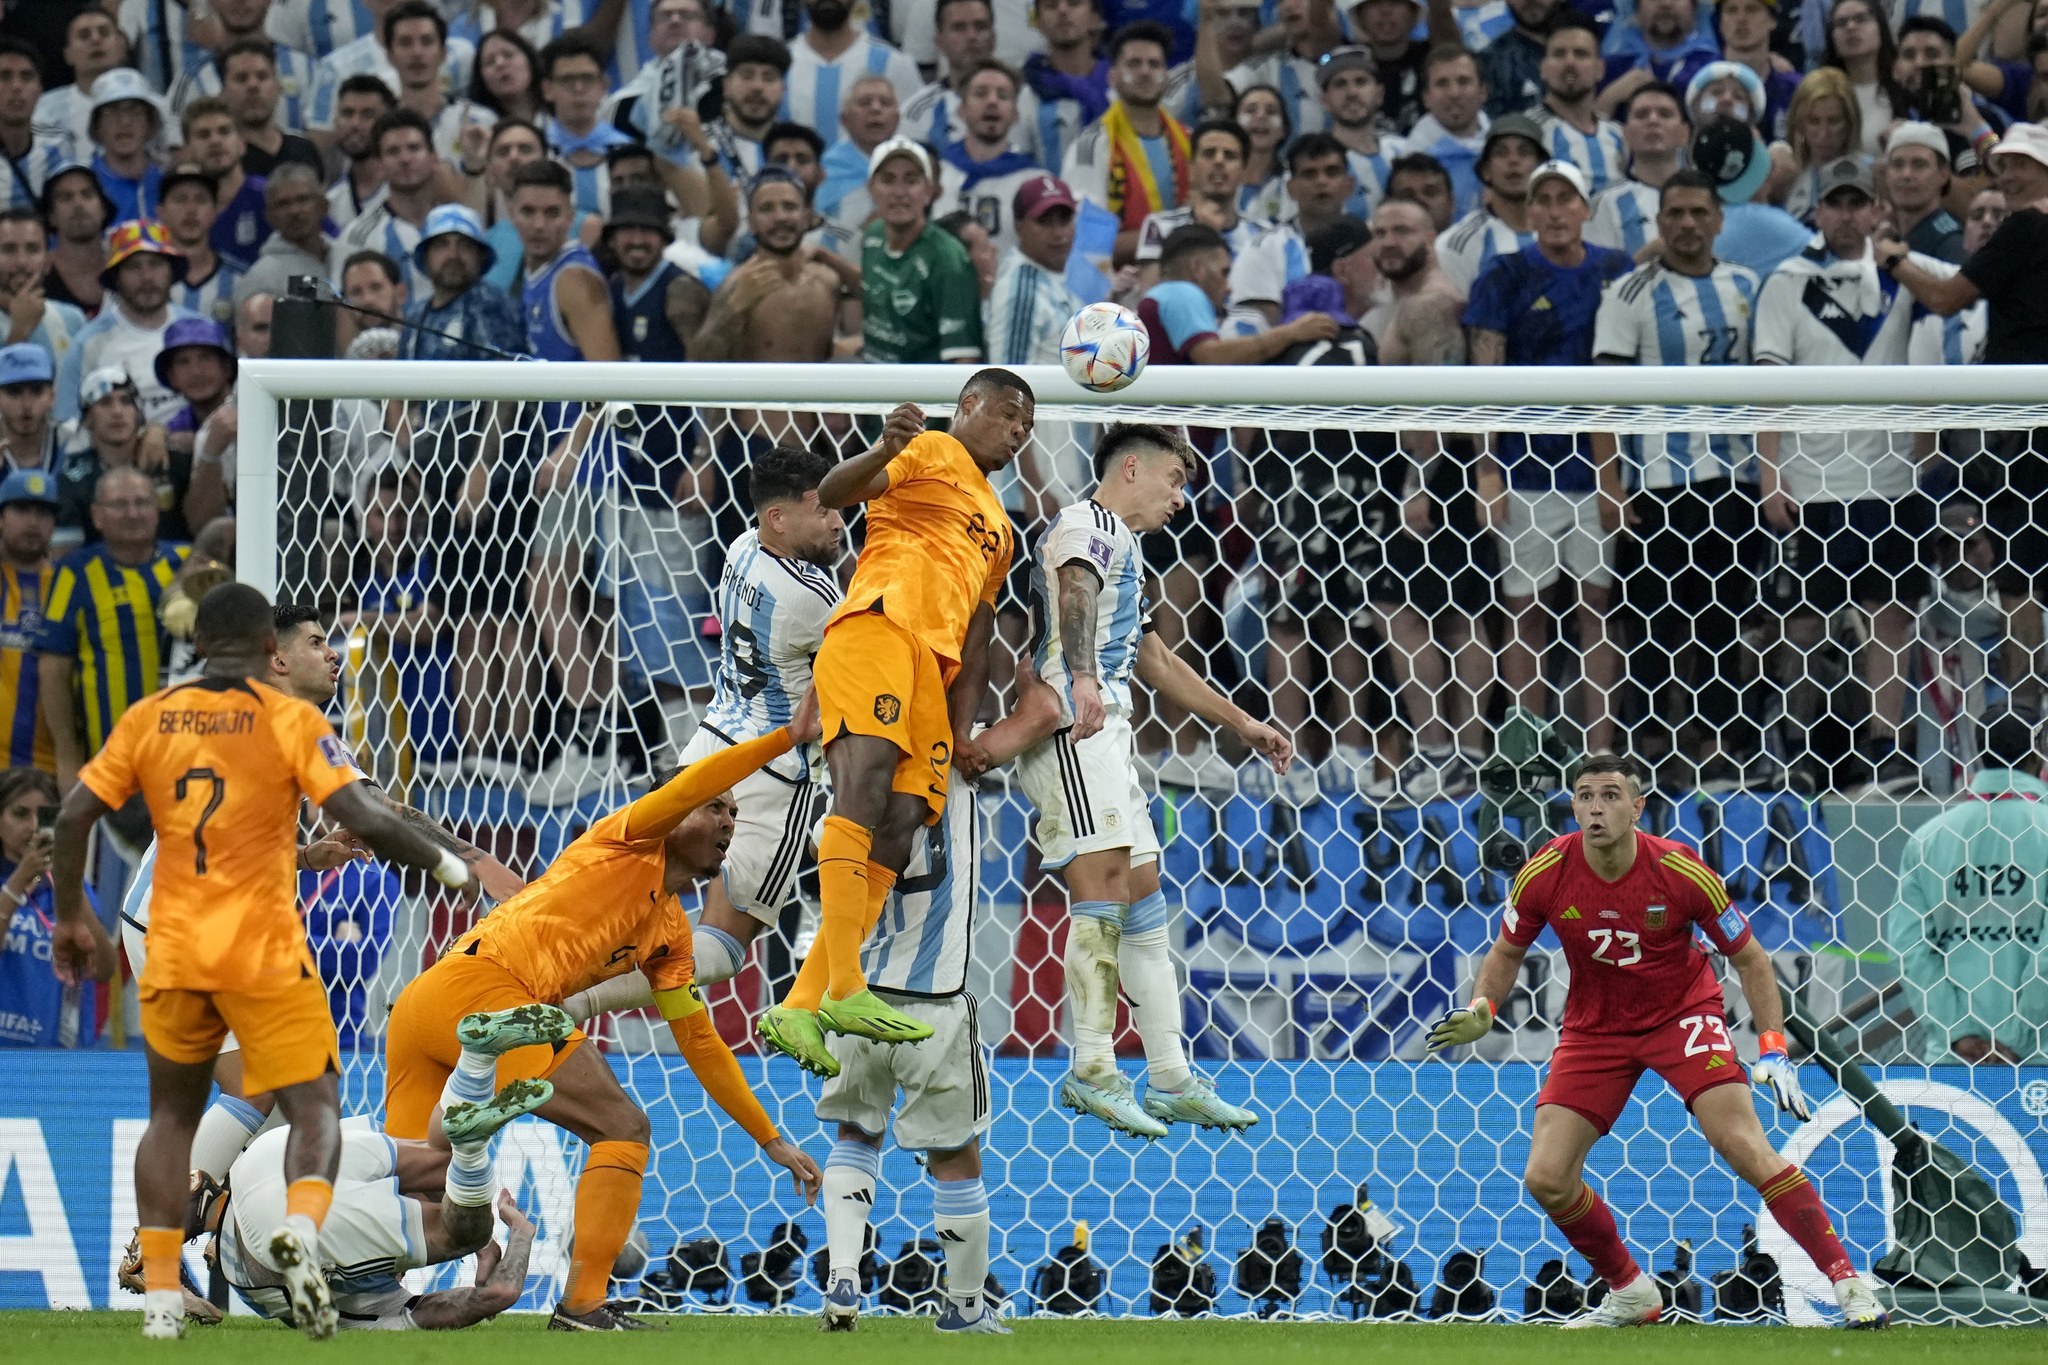  lt;HIT gt;Argentina lt;/HIT gt;'s goalkeeper Emiliano Martinez, right, watches as  lt;HIT gt;Argentina lt;/HIT gt;'s Lisandro Martinez, 2nd right, jumps for the ball with Denzel Dumfries of the Netherlands during the World Cup quarterfinal soccer match between the Netherlands and  lt;HIT gt;Argentina lt;/HIT gt;, at the Lusail Stadium in Lusail, Qatar, Friday, Dec. 9, 2022. (AP Photo/Ricardo Mazalan)